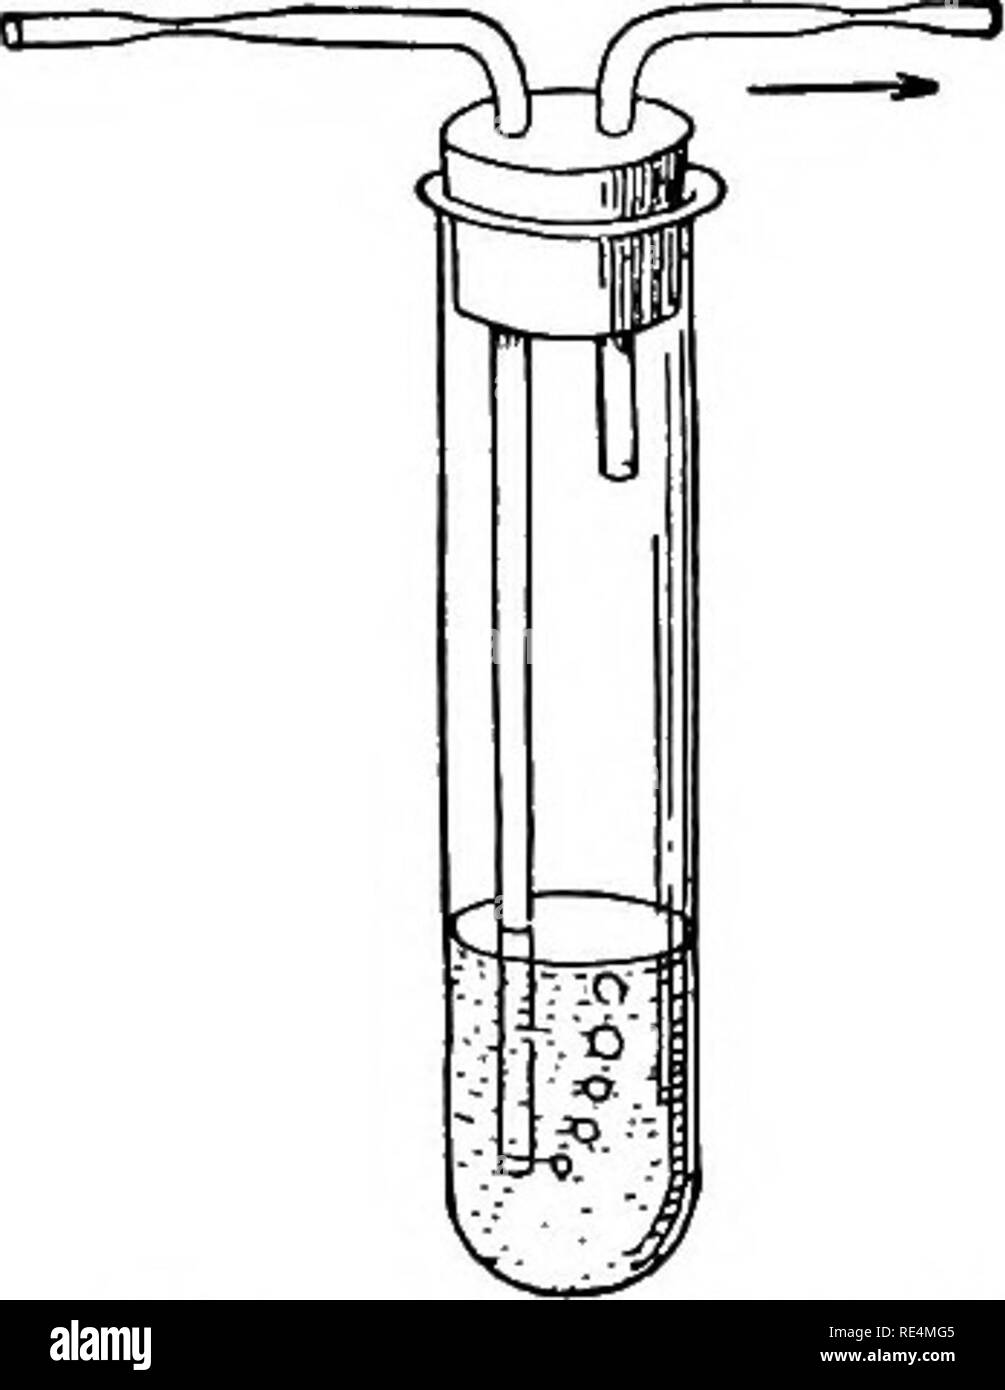 . Manual of bacteriology. Bacteriology. 6o METHODS OF CULTIVATION OF BACTERIA.. Fig. 24. — Esmarch's roll-tube adapted for cul- ture containing anaerobes. ing from the last bottle to the vessel containing the medium ought to be sterilised by passing through a Bunsen flame, and should have a small plug of cotton wool in it to filter the hydro- gen germ-free. Separation of Anaerobic Organisms. — {a) By Roll-tubes. — A i^ inch test-tube has as much gelatin put into it as would be ., I used in the Esmarch roll-tube method. It is corked with an india-rubber stopper hav- ing two tubes passing throug Stock Photo